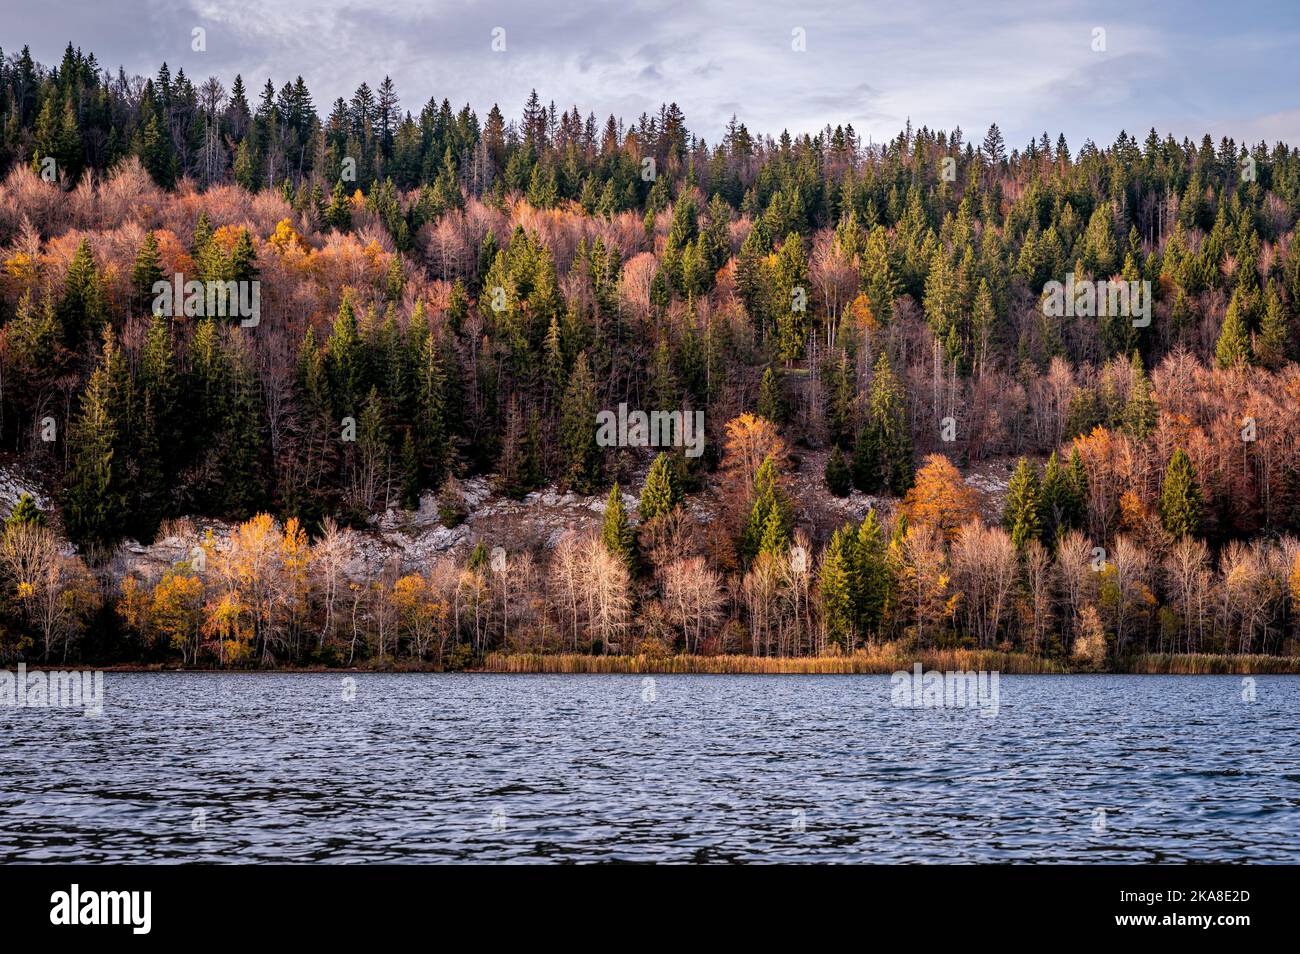 Landscape with mountain, lake and trees in autumn. Lac Brenet. Vallee de Joux, Vaud Canton, Switzerland Stock Photo